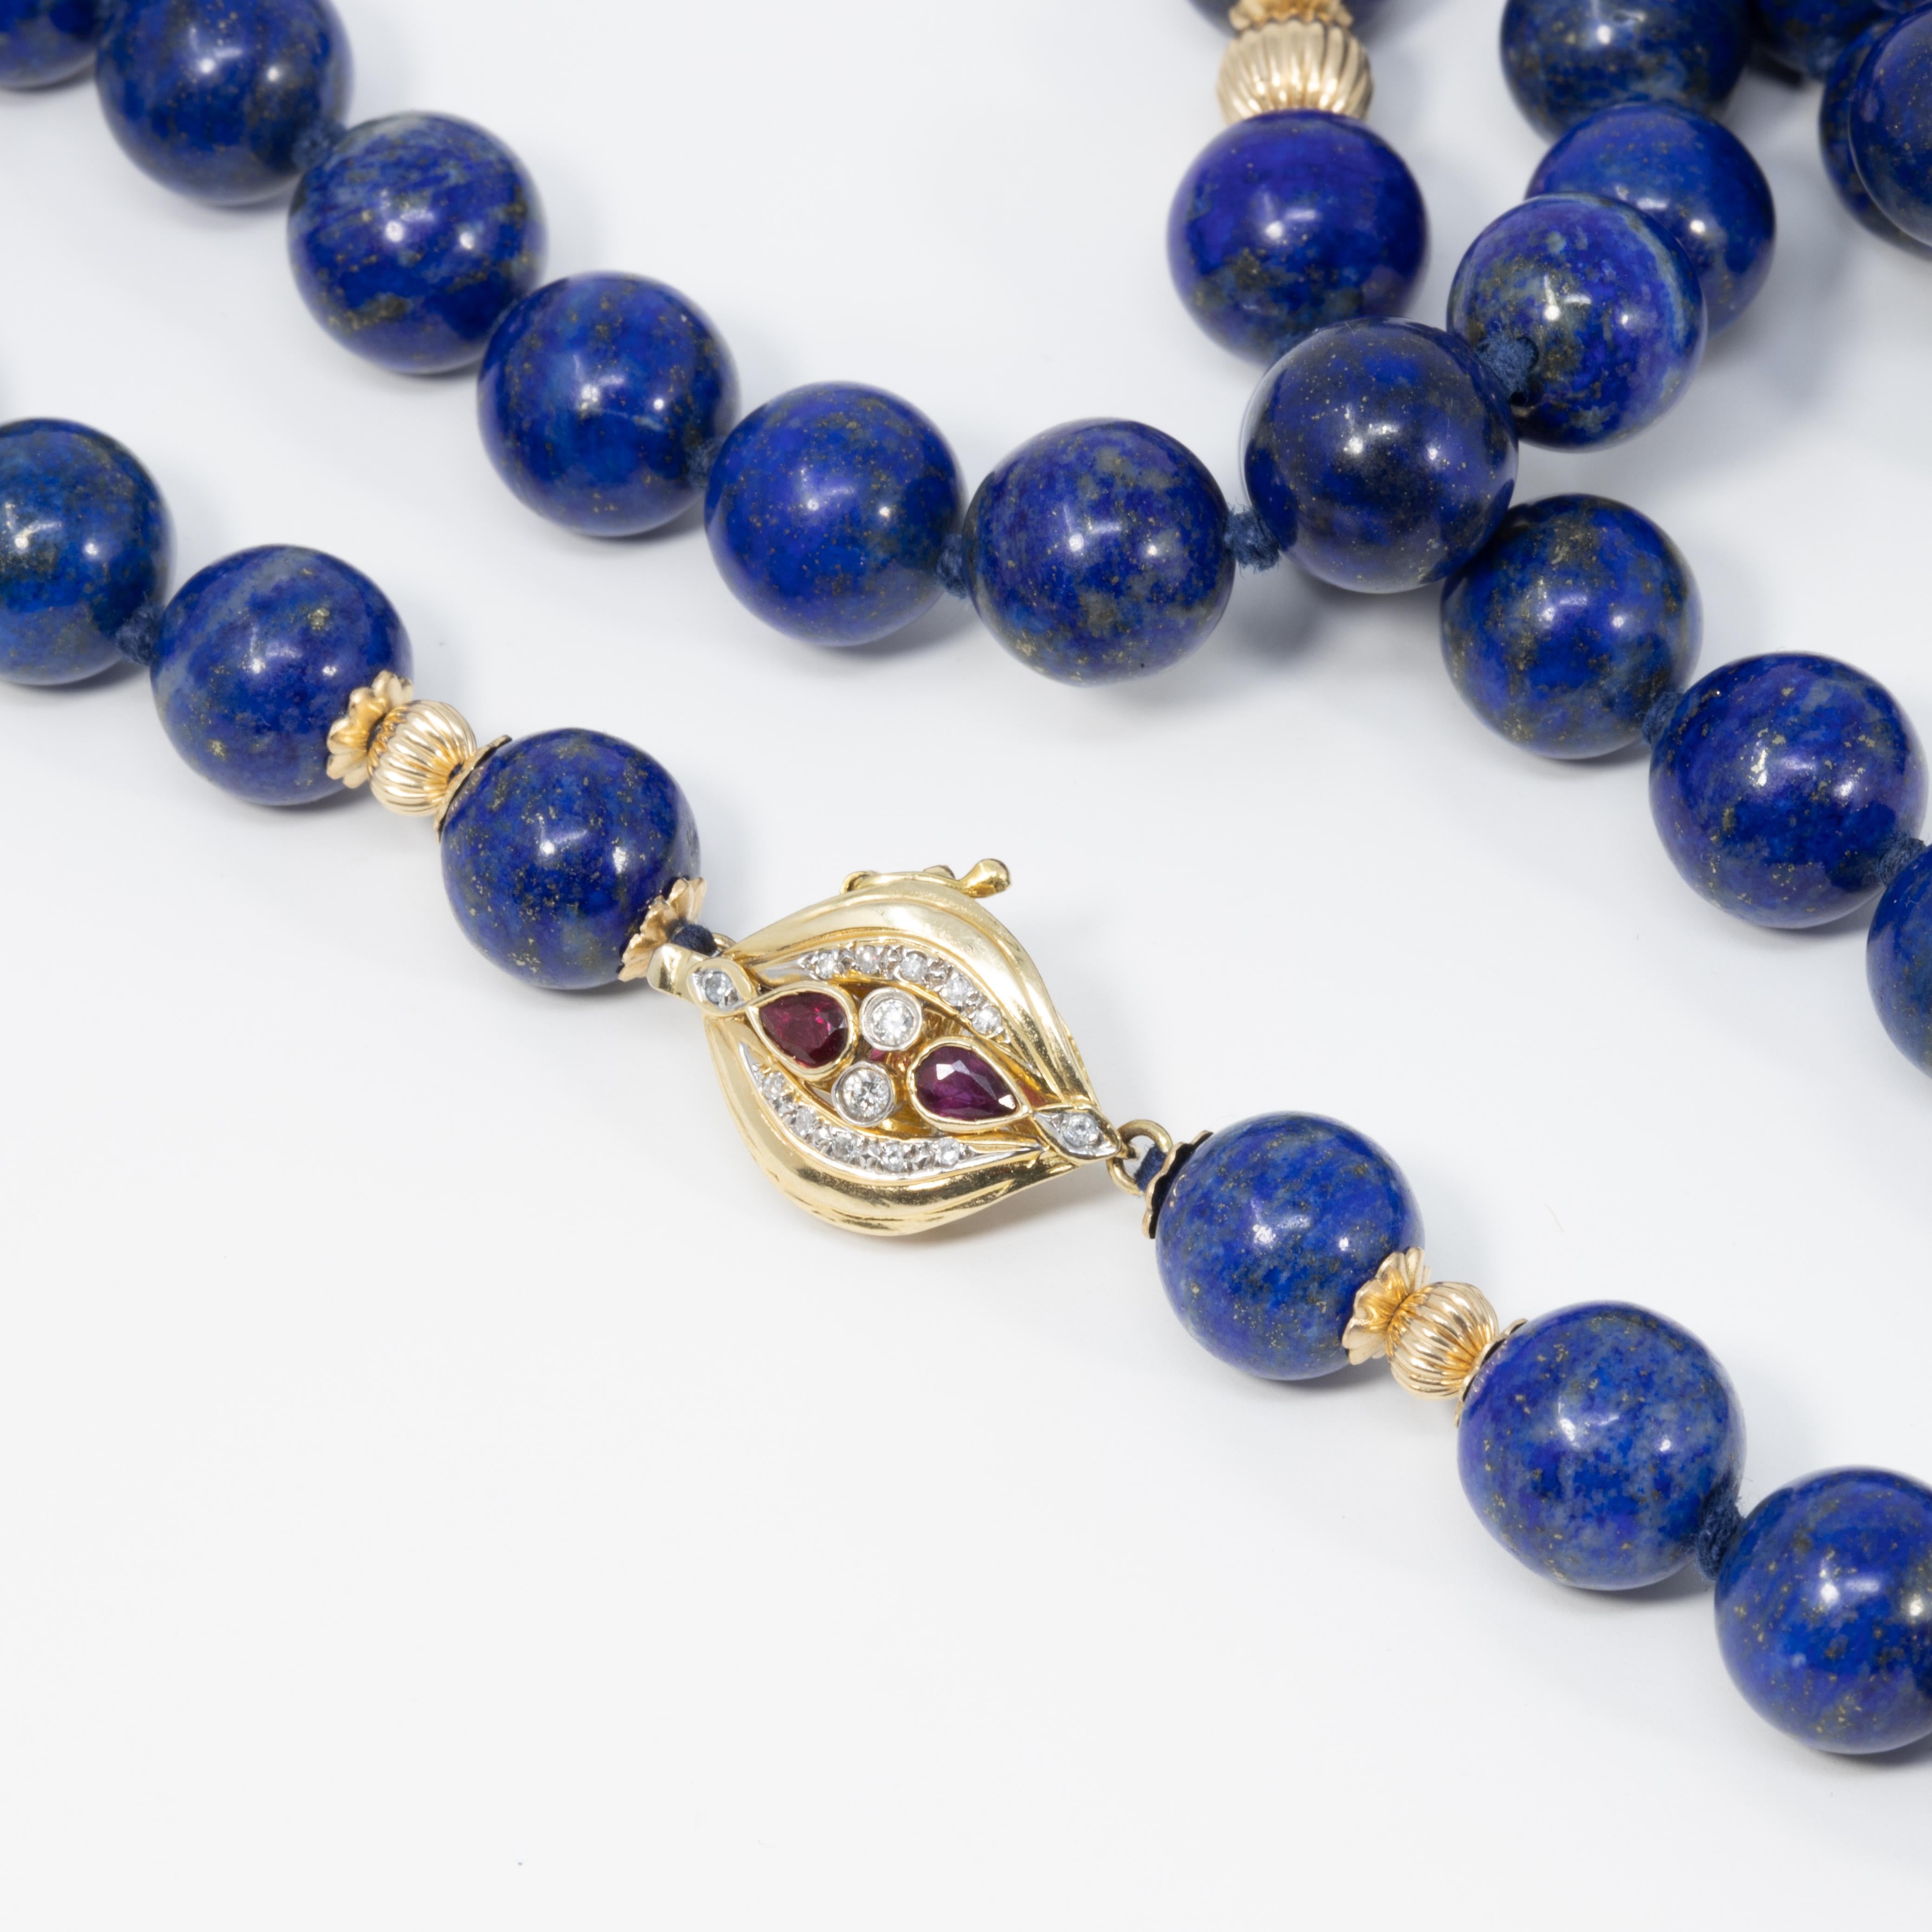 Women's Lapis Lazuli Long Rope Bead Necklace, 14 Karat Gold, Diamond and Ruby Gold Clasp For Sale